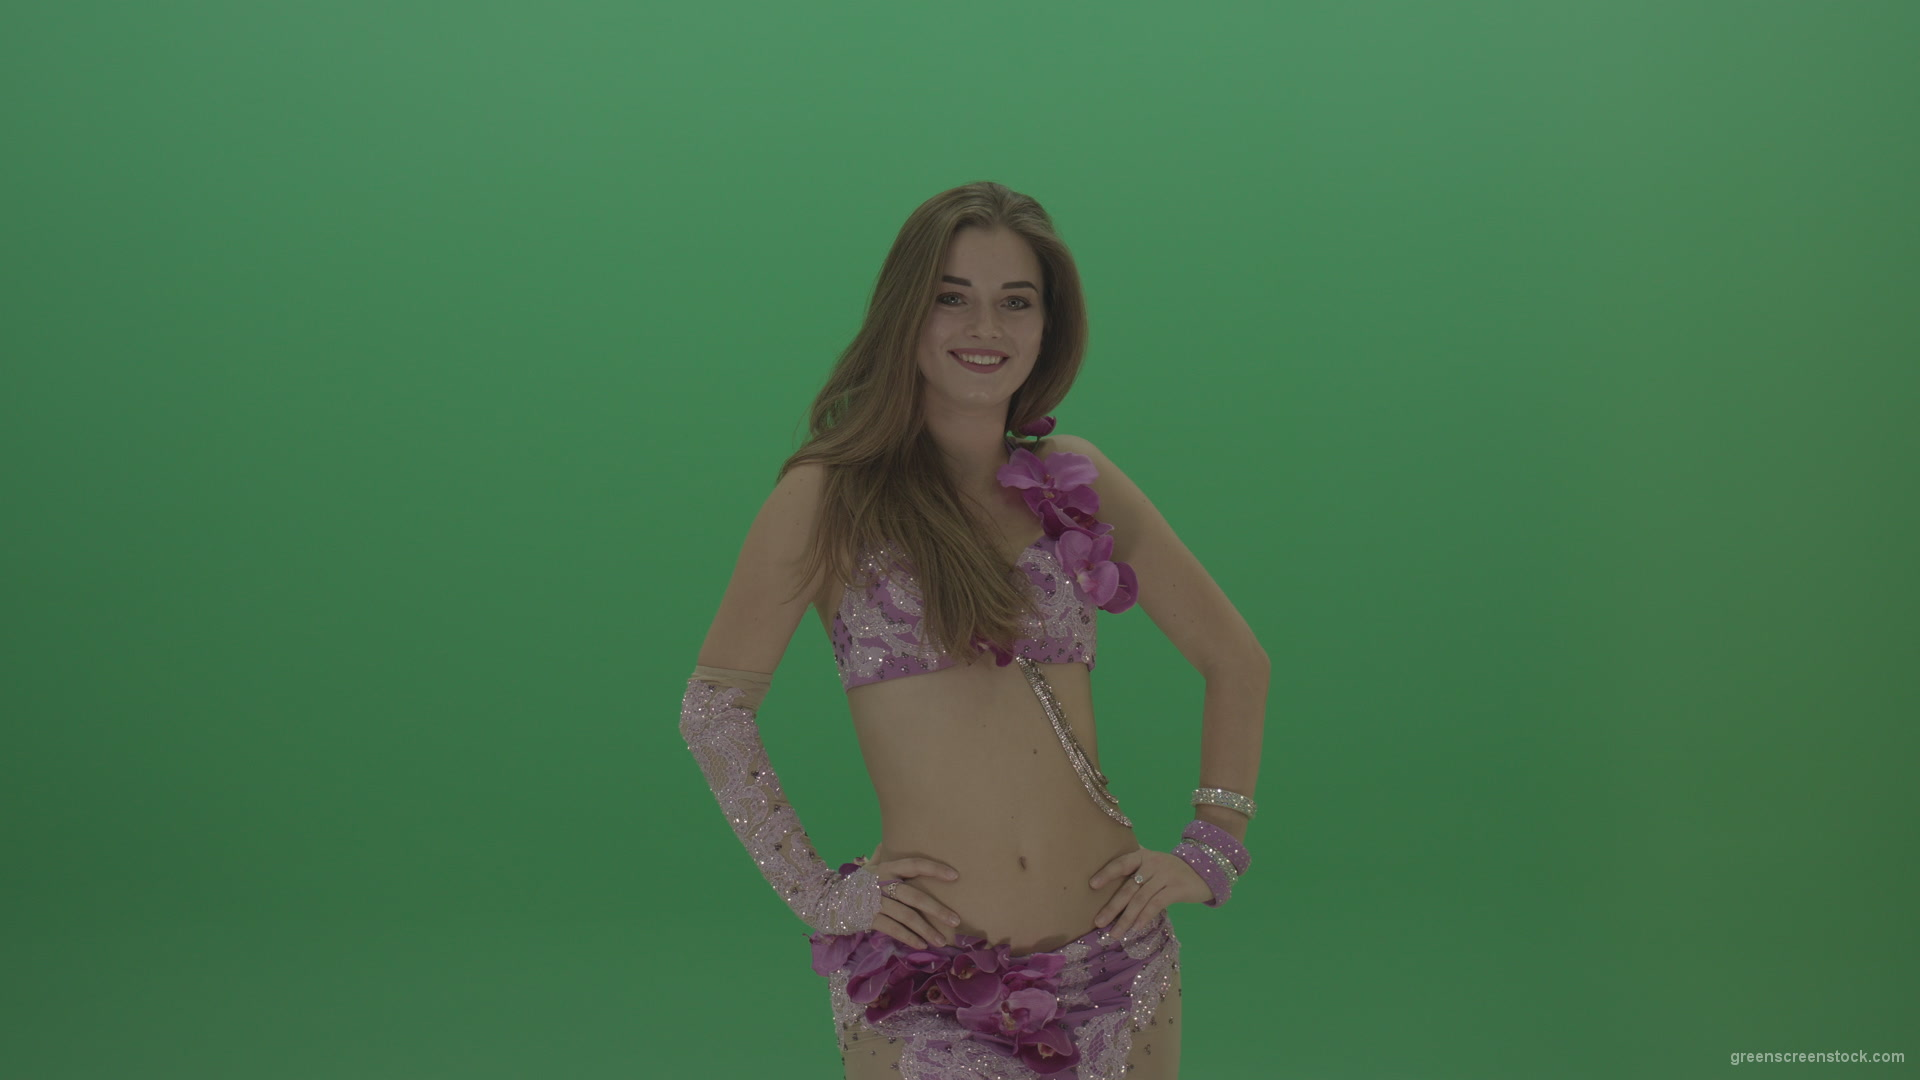 Beautiful-belly-dancer-in-purple-wear-winks-as-she-poses-over-green-screen-background_009 Green Screen Stock